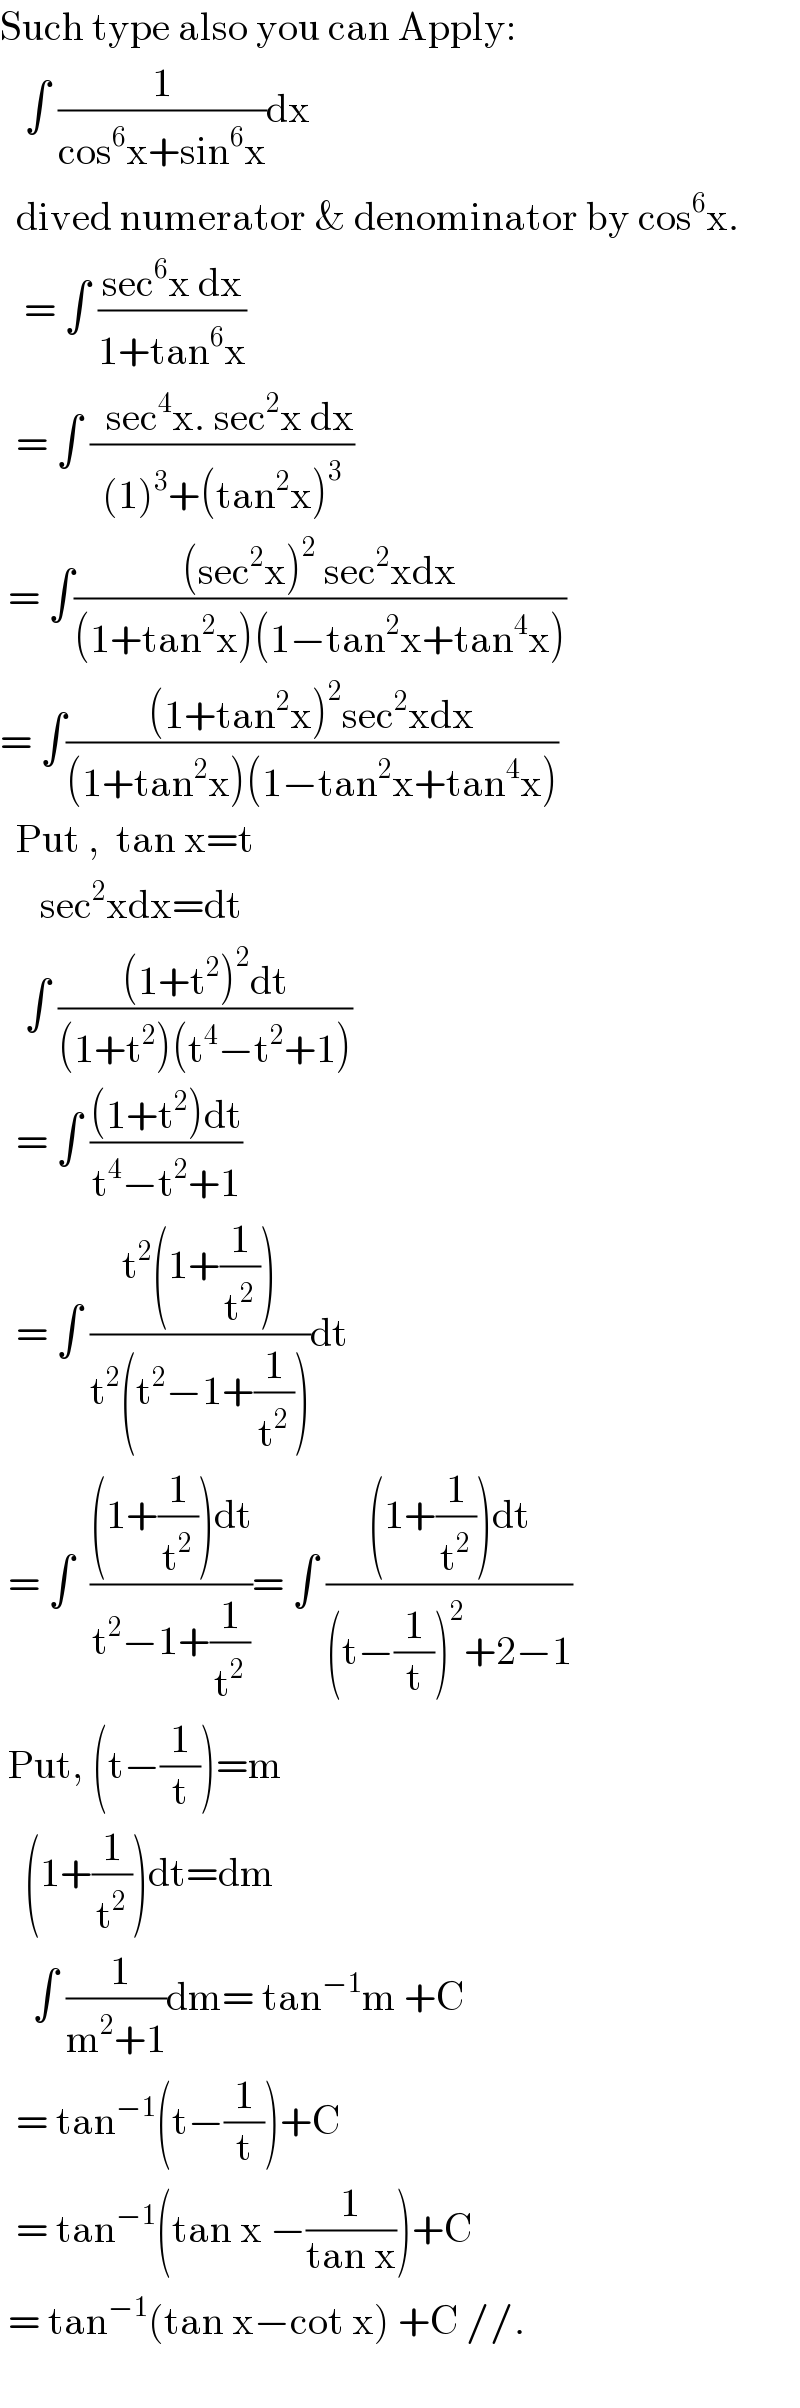 Such type also you can Apply:     ∫ (1/(cos^6 x+sin^6 x))dx    dived numerator & denominator by cos^6 x.     = ∫ ((sec^6 x dx)/(1+tan^6 x))    = ∫ ((  sec^4 x. sec^2 x dx)/((1)^3 +(tan^2 x)^3 ))   = ∫(((sec^2 x)^2  sec^2 xdx)/((1+tan^2 x)(1−tan^2 x+tan^4 x)))  = ∫(((1+tan^2 x)^2 sec^2 xdx)/((1+tan^2 x)(1−tan^2 x+tan^4 x)))    Put ,  tan x=t       sec^2 xdx=dt     ∫ (((1+t^2 )^2 dt)/((1+t^2 )(t^4 −t^2 +1)))    = ∫ (((1+t^2 )dt)/(t^4 −t^2 +1))    = ∫ ((t^2 (1+(1/t^2 )))/(t^2 (t^2 −1+(1/t^2 ))))dt   = ∫  (((1+(1/t^2 ))dt)/(t^2 −1+(1/t^2 )))= ∫ (((1+(1/t^2 ))dt)/((t−(1/t))^2 +2−1))   Put, (t−(1/t))=m     (1+(1/t^2 ))dt=dm      ∫ (( 1)/(m^2 +1))dm= tan^(−1) m +C    = tan^(−1) (t−(1/t))+C    = tan^(−1) (tan x −(1/(tan x)))+C   = tan^(−1) (tan x−cot x) +C //.    